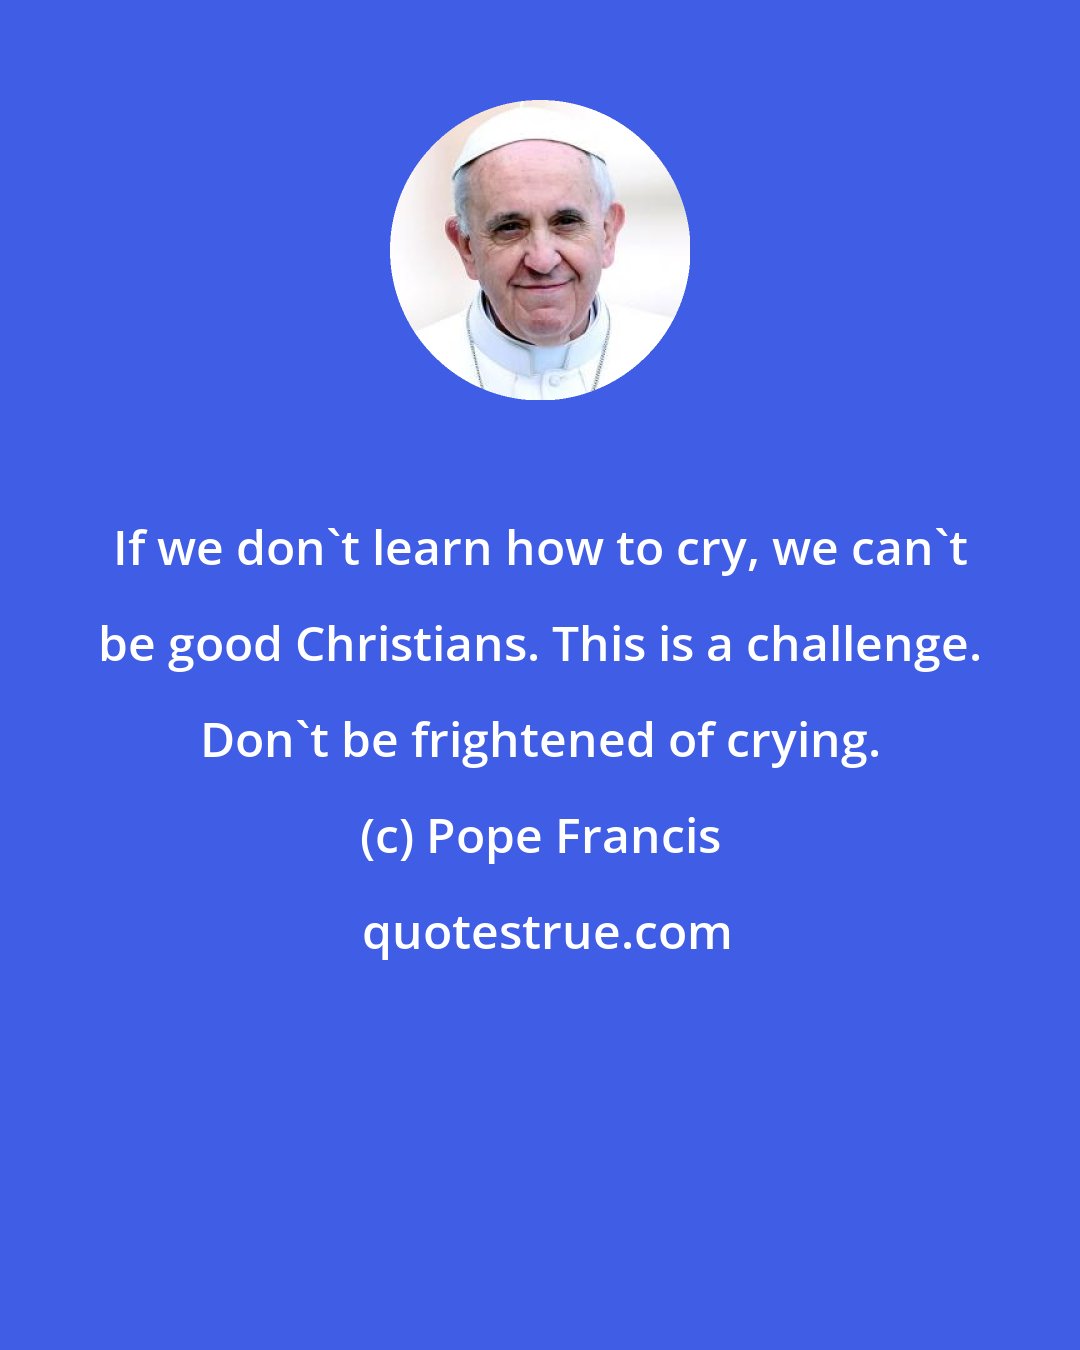 Pope Francis: If we don't learn how to cry, we can't be good Christians. This is a challenge. Don't be frightened of crying.